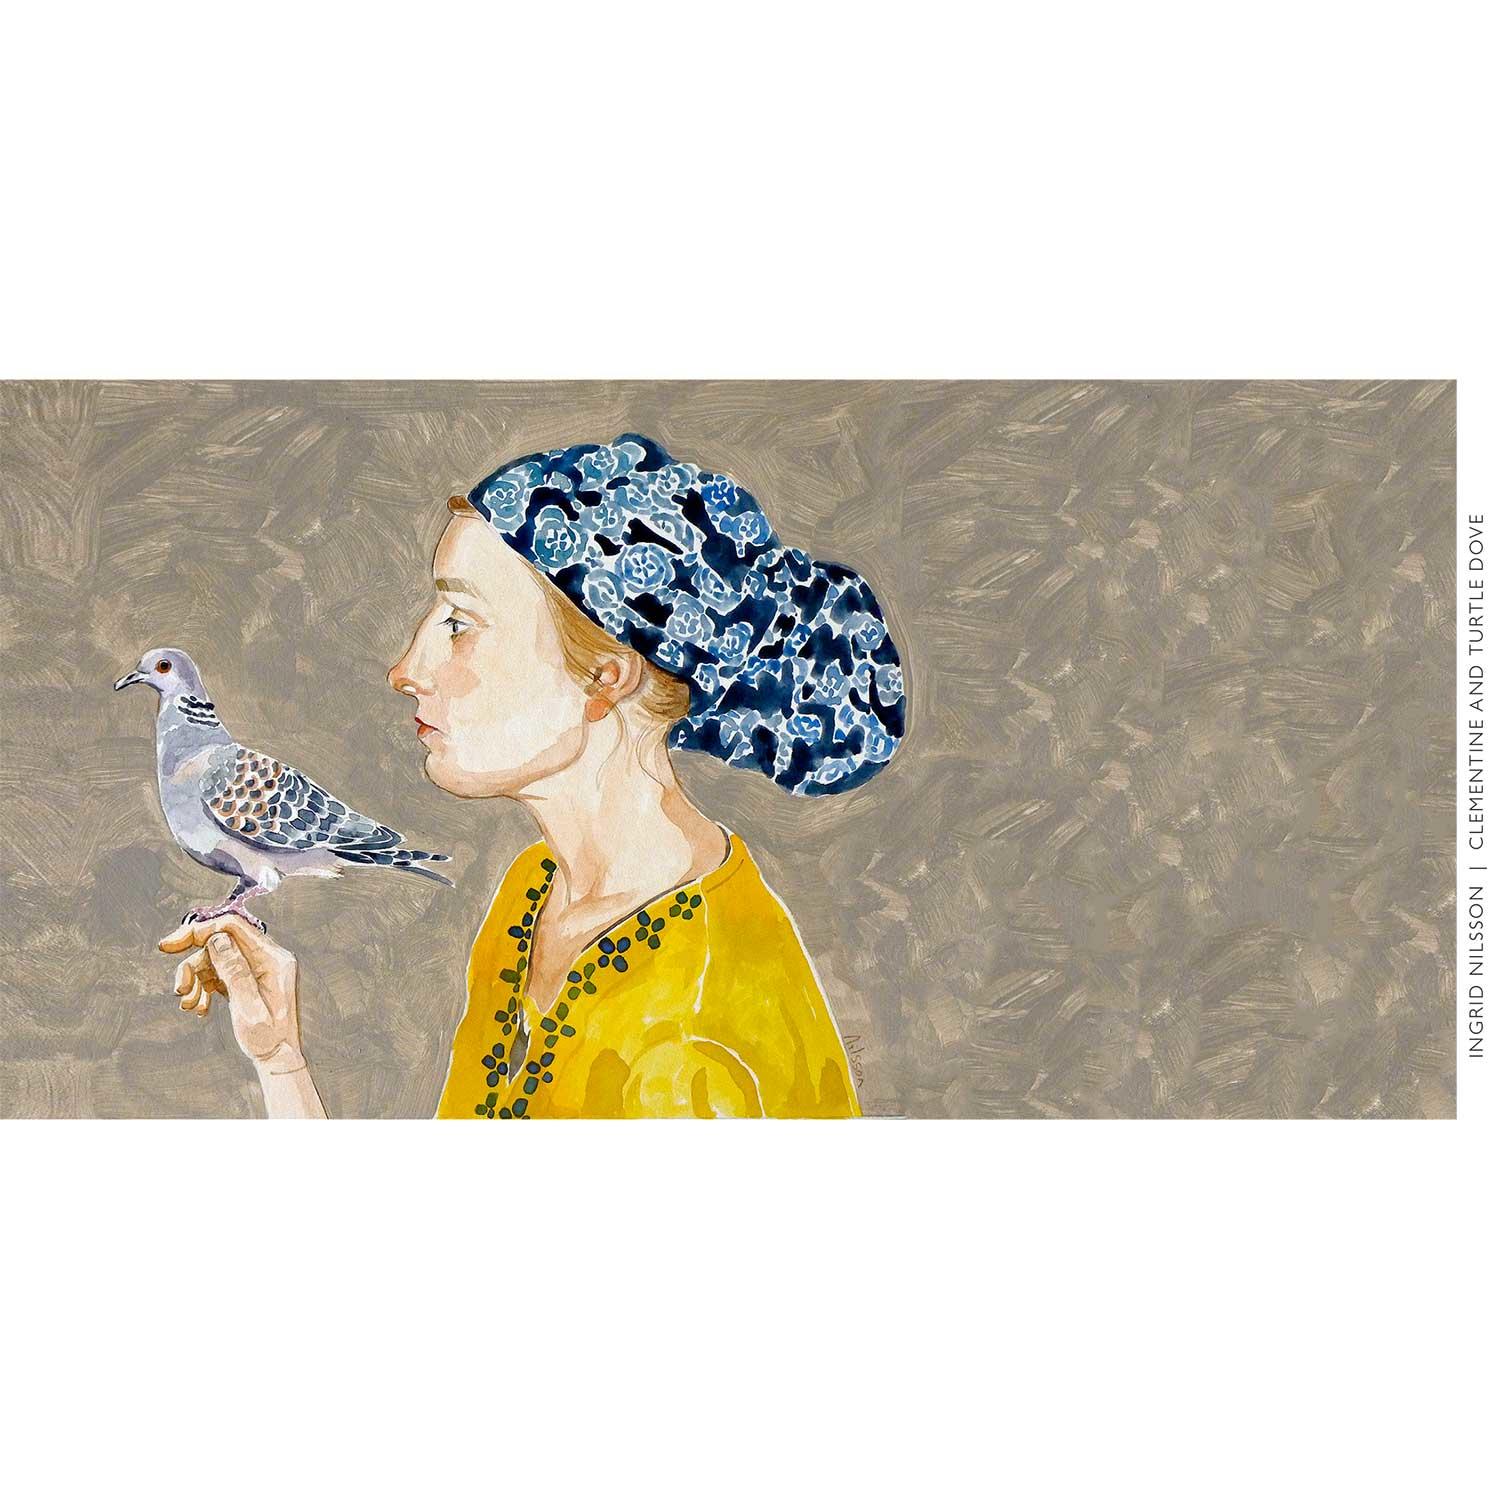 Clementine and Turtle Dove  by artist Ingrid Nilsson